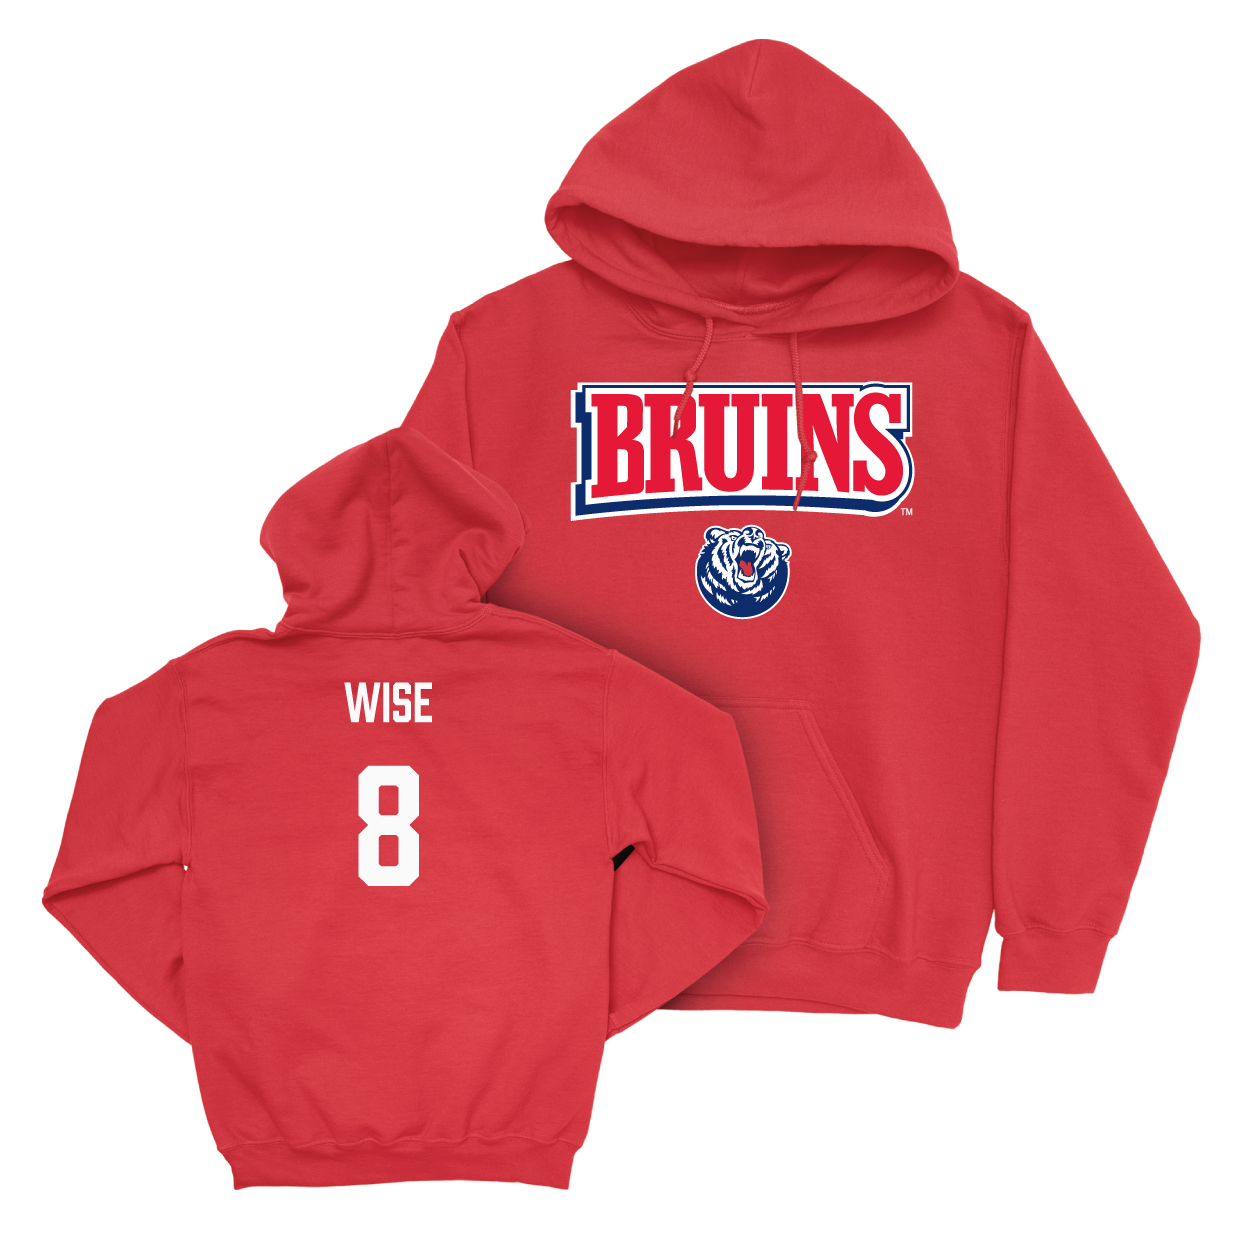 Belmont Women's Soccer Red Bruins Hoodie - Kennedy Wise Small